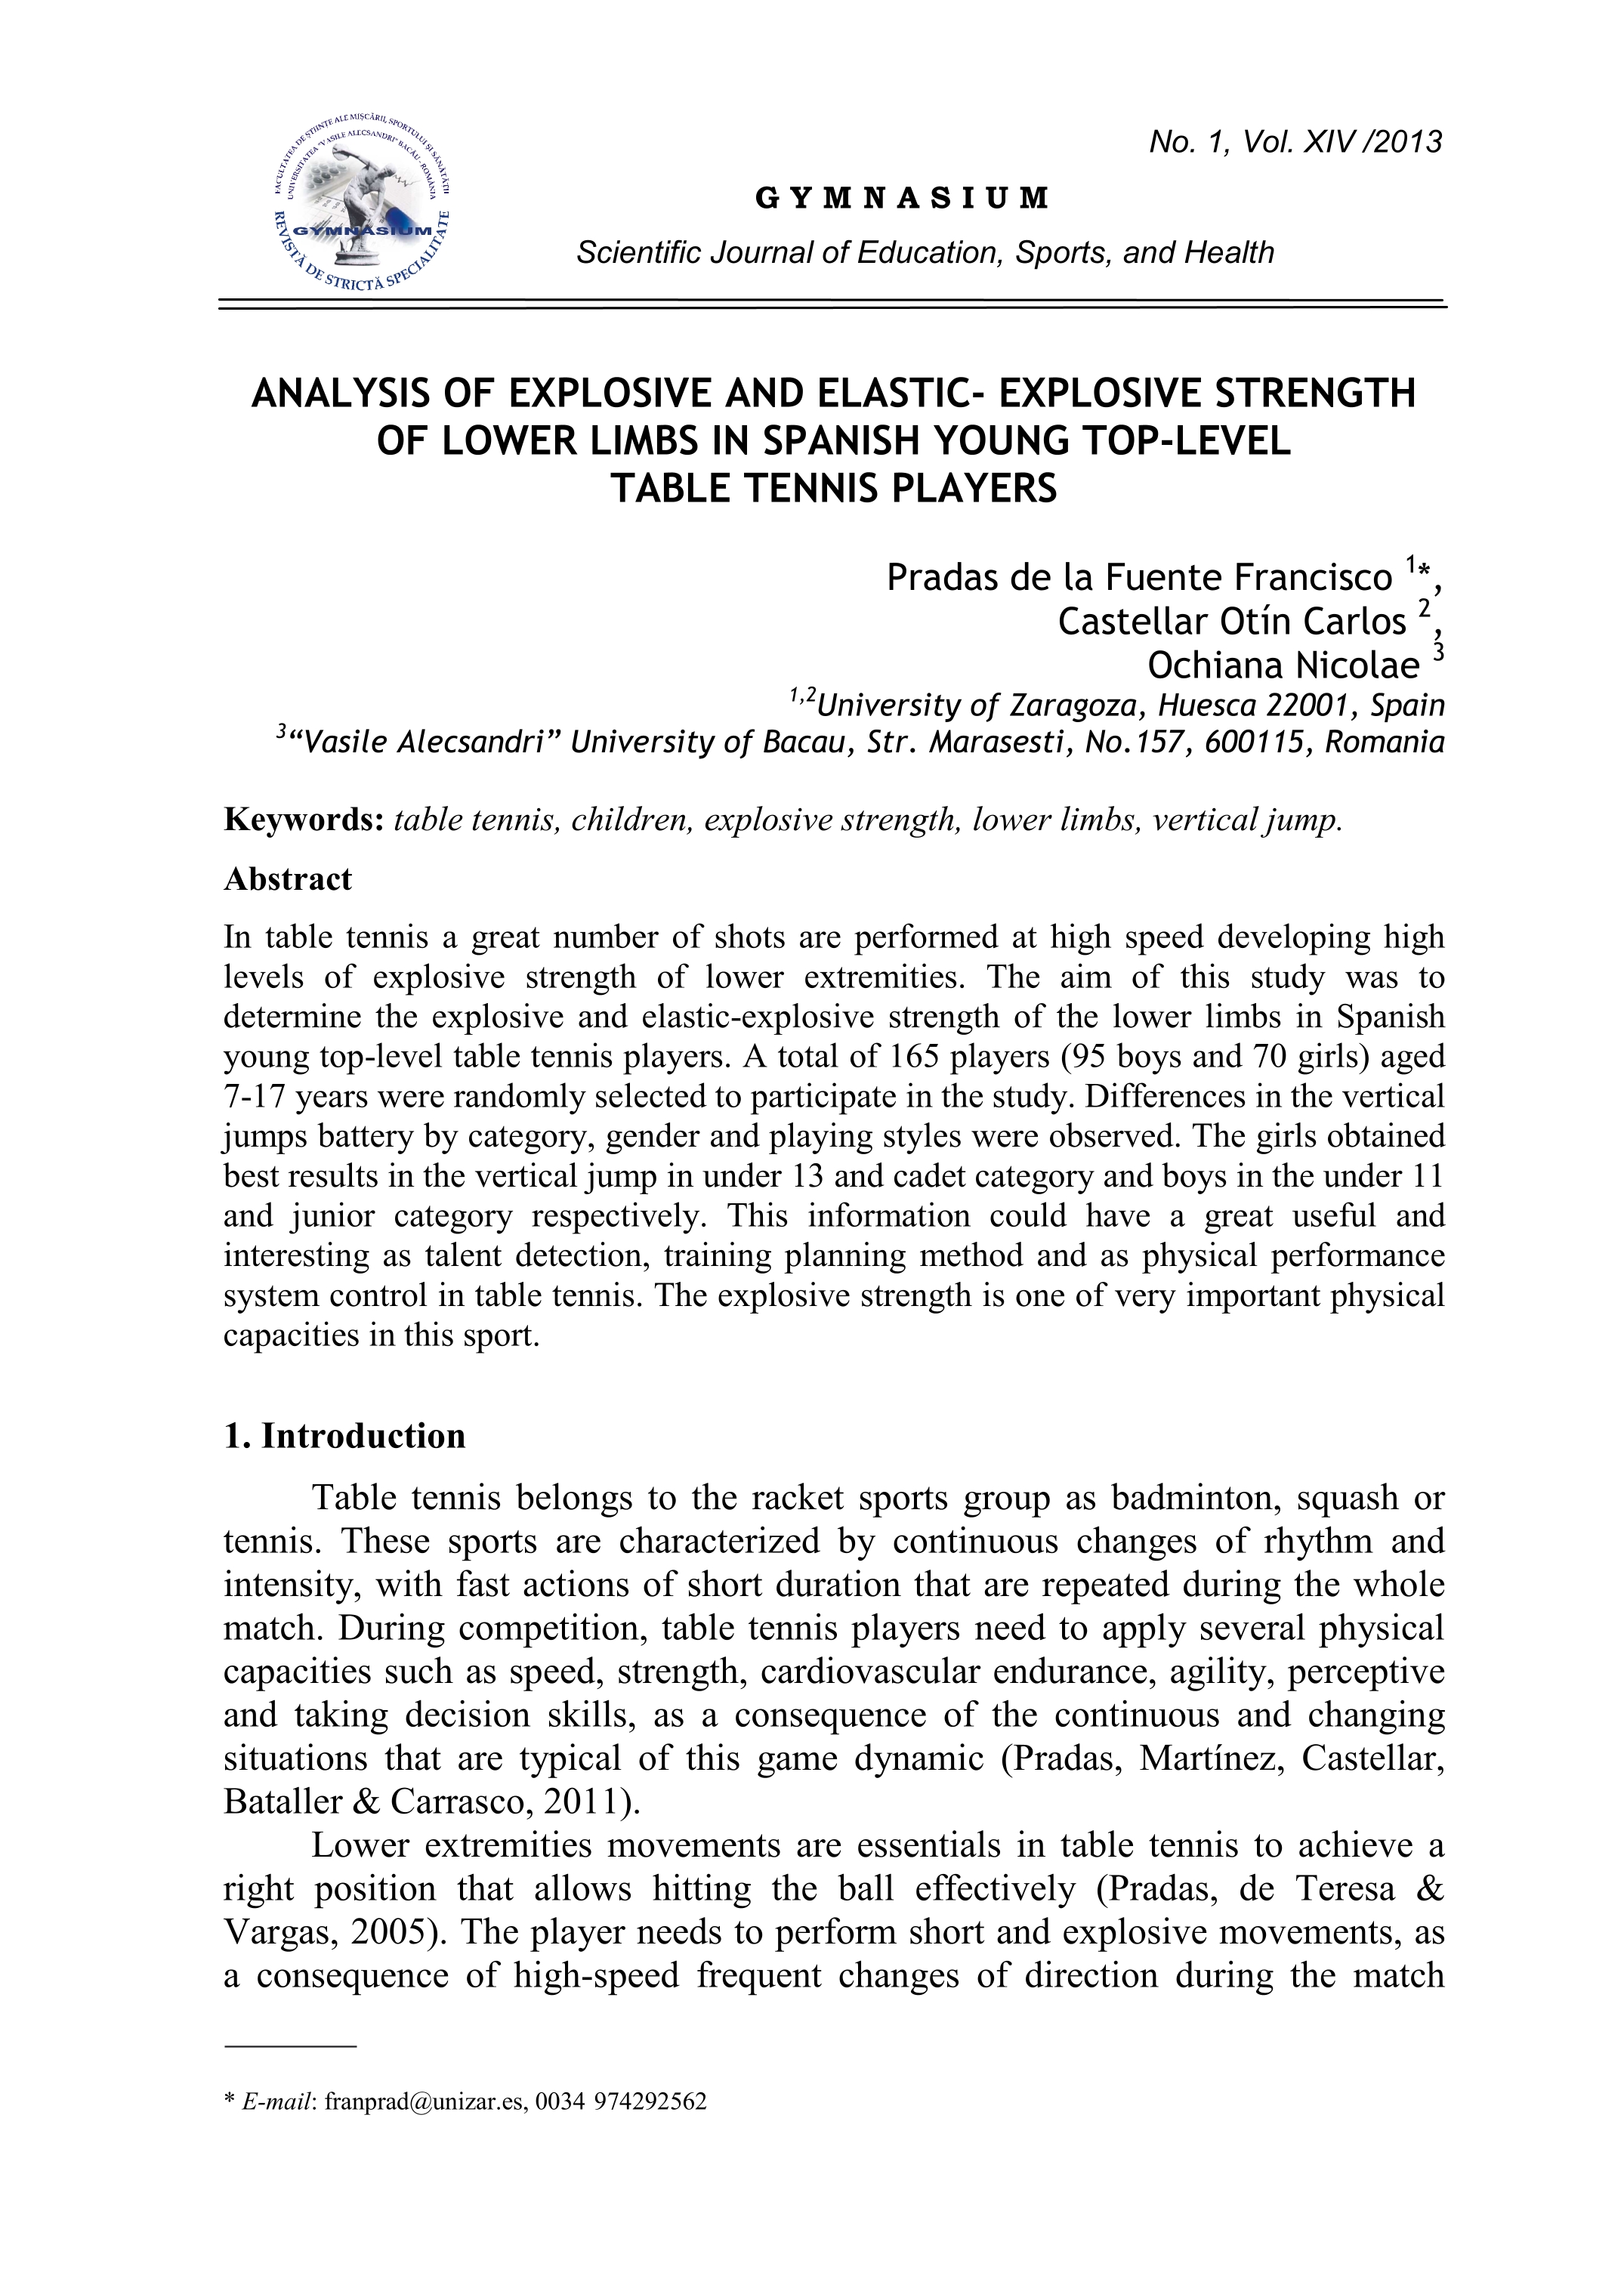 Analysis of explosive and elastic-explosive strength of lower limbs in spanish young toplevel table tennis players